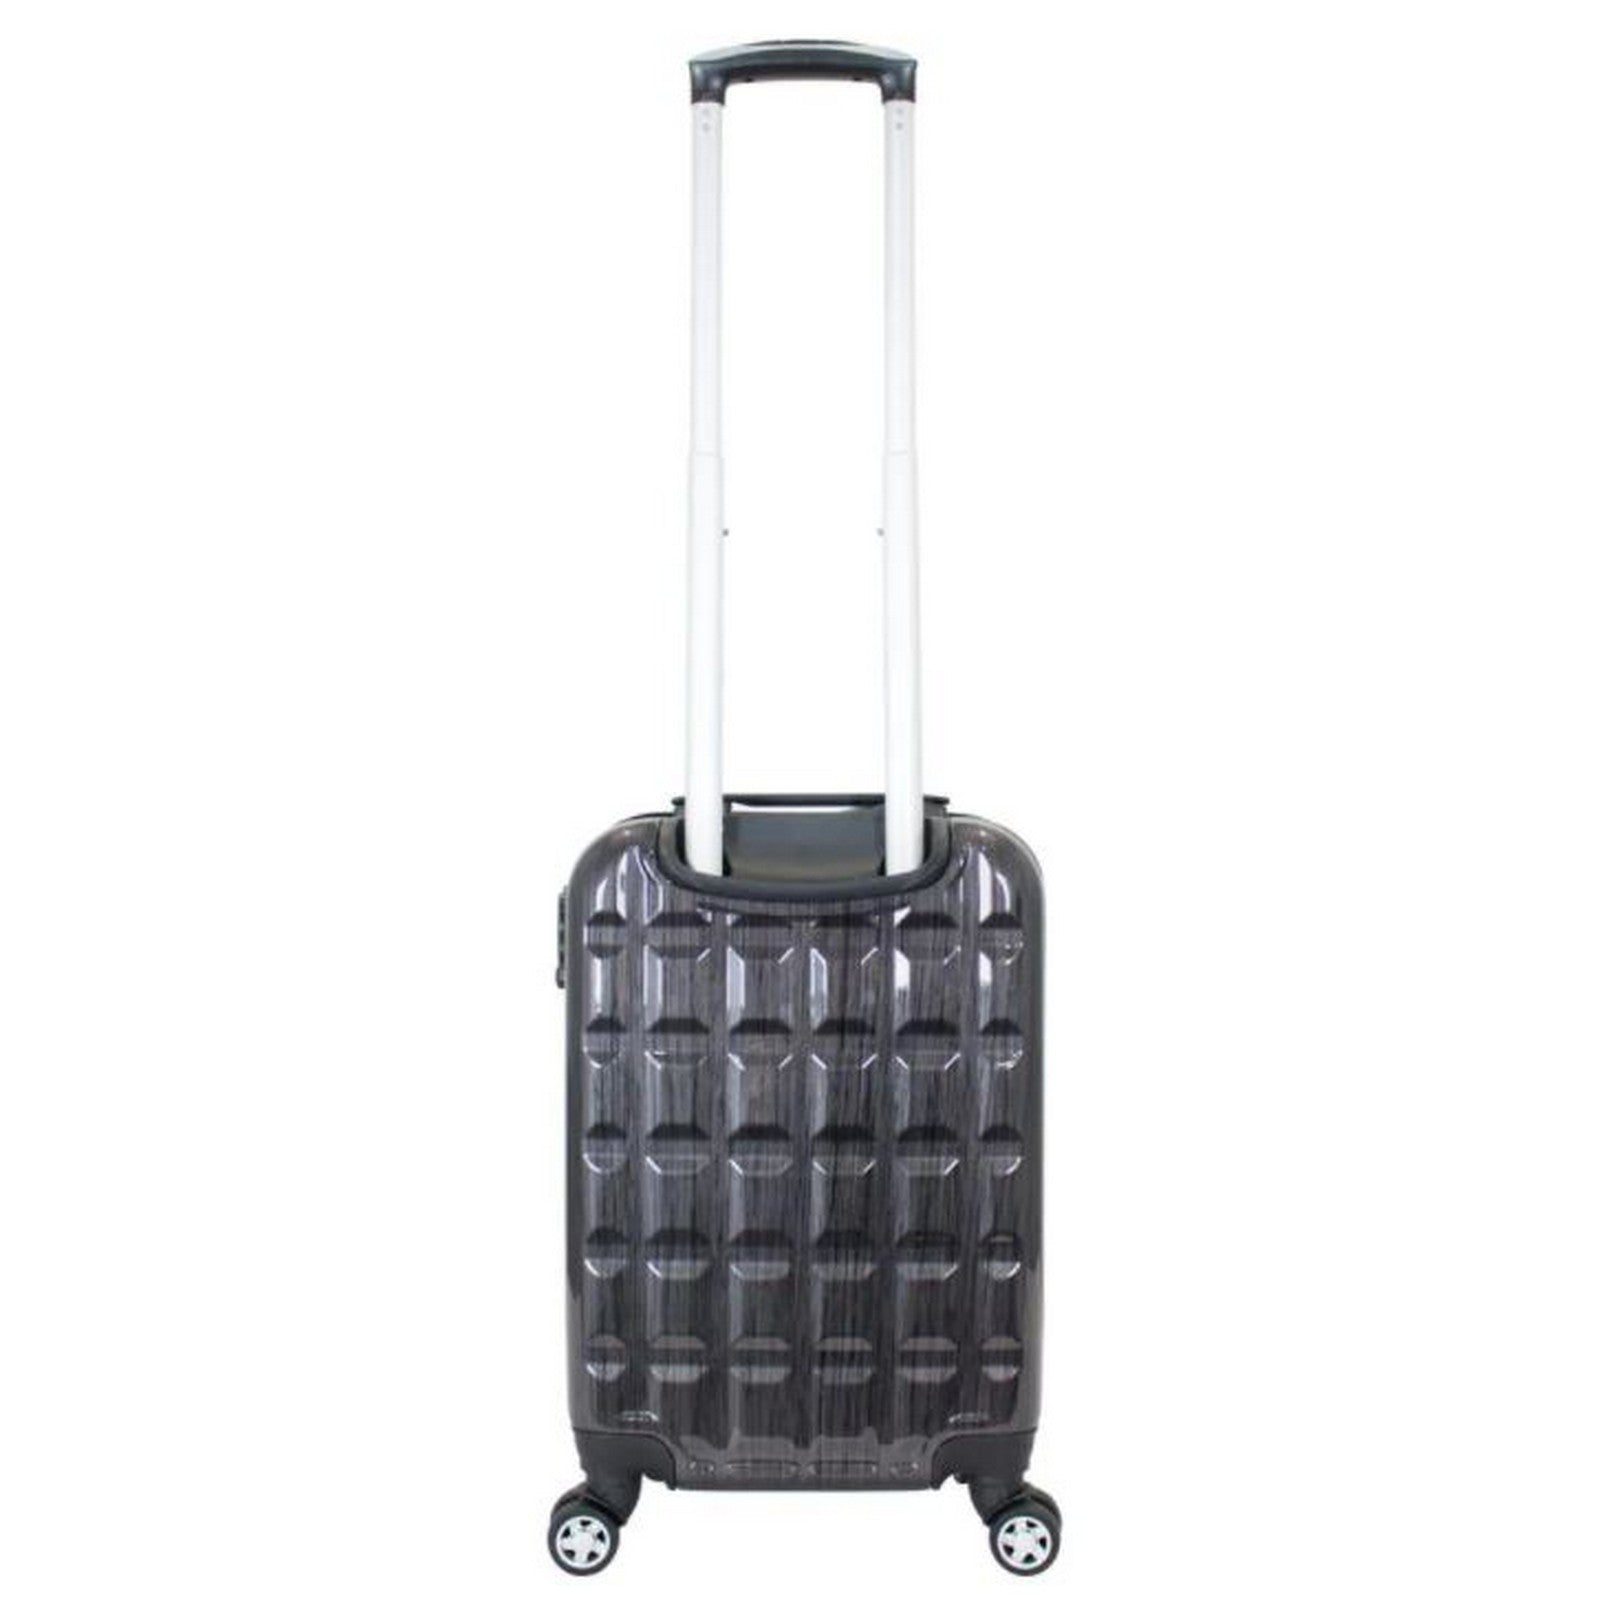 Chariot Duro 20-inch Carry-On Spinner Suitcase with Laptop Pocket